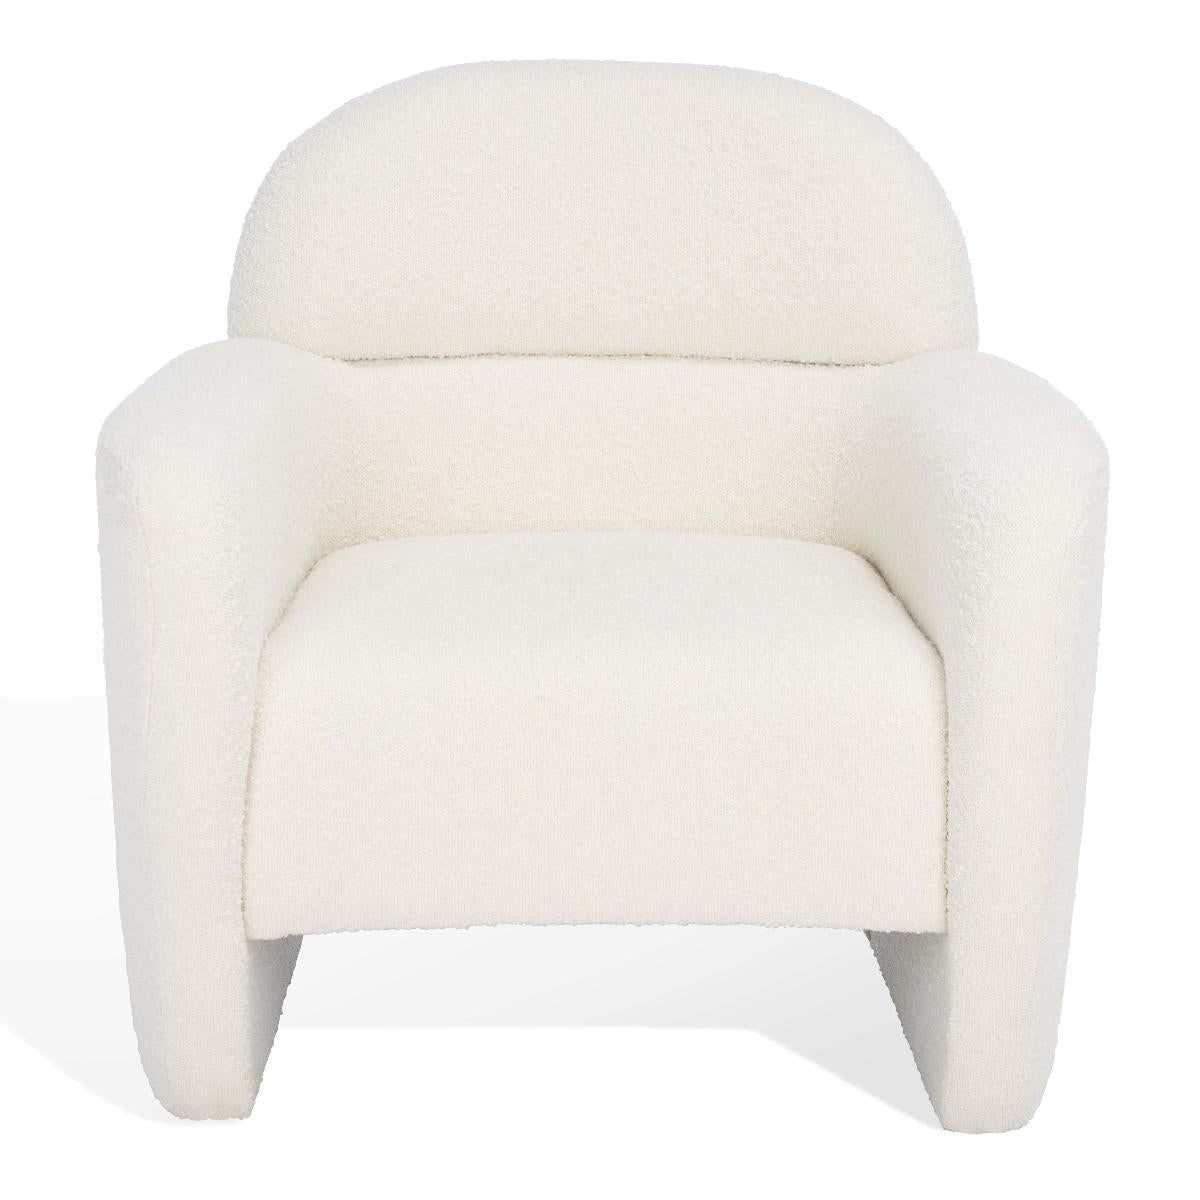 Safavieh Couture Bellamaria Boucle Accent Chair - Ivory